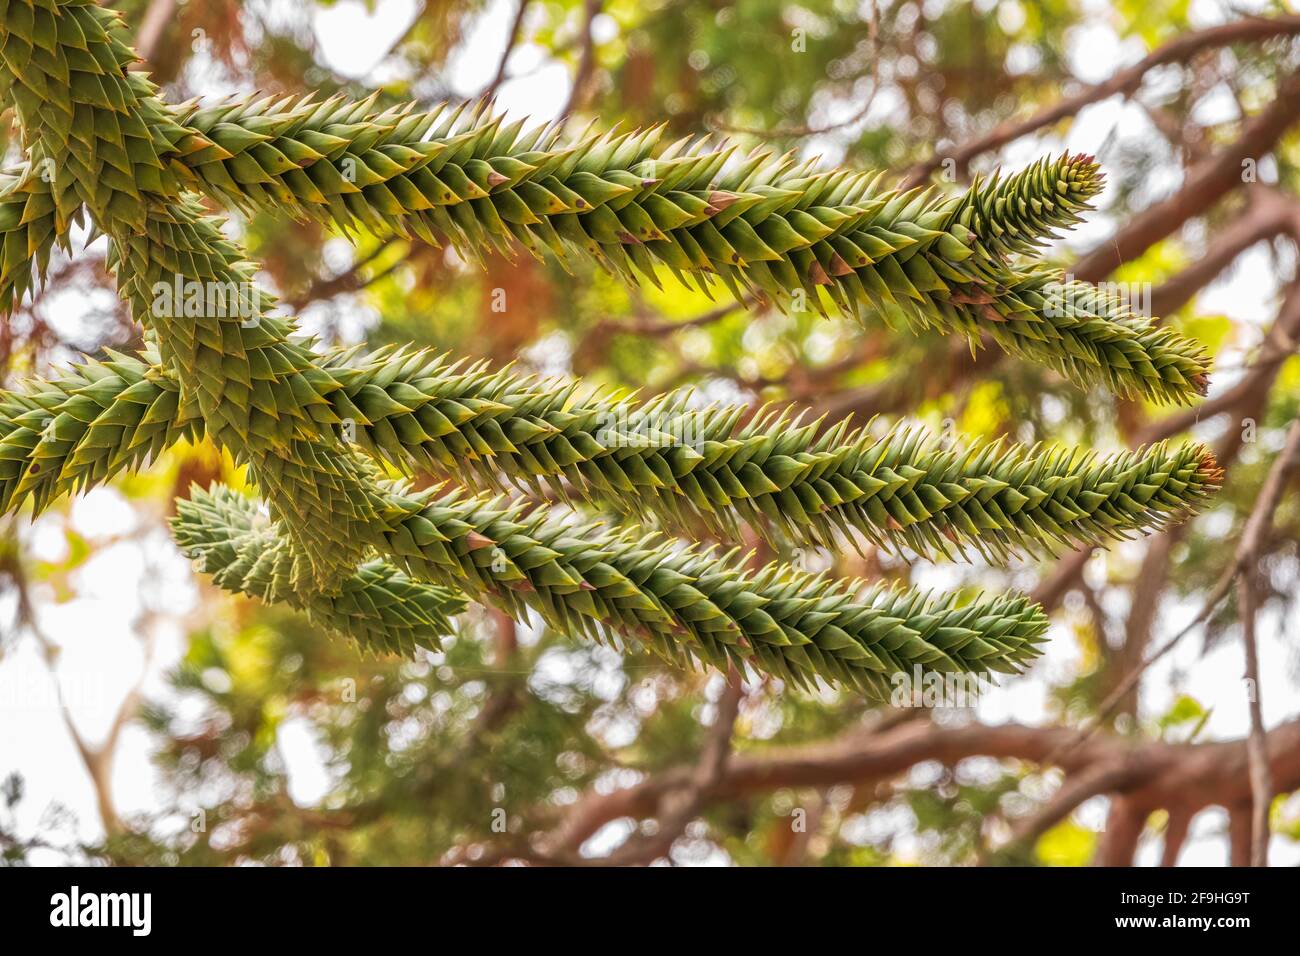 Needles of evergreen tree Araucaria araucana,commonly called the Monkey Puzzle Tree, Monkey Tail Tree, Pewen or Chilean Pine Stock Photo